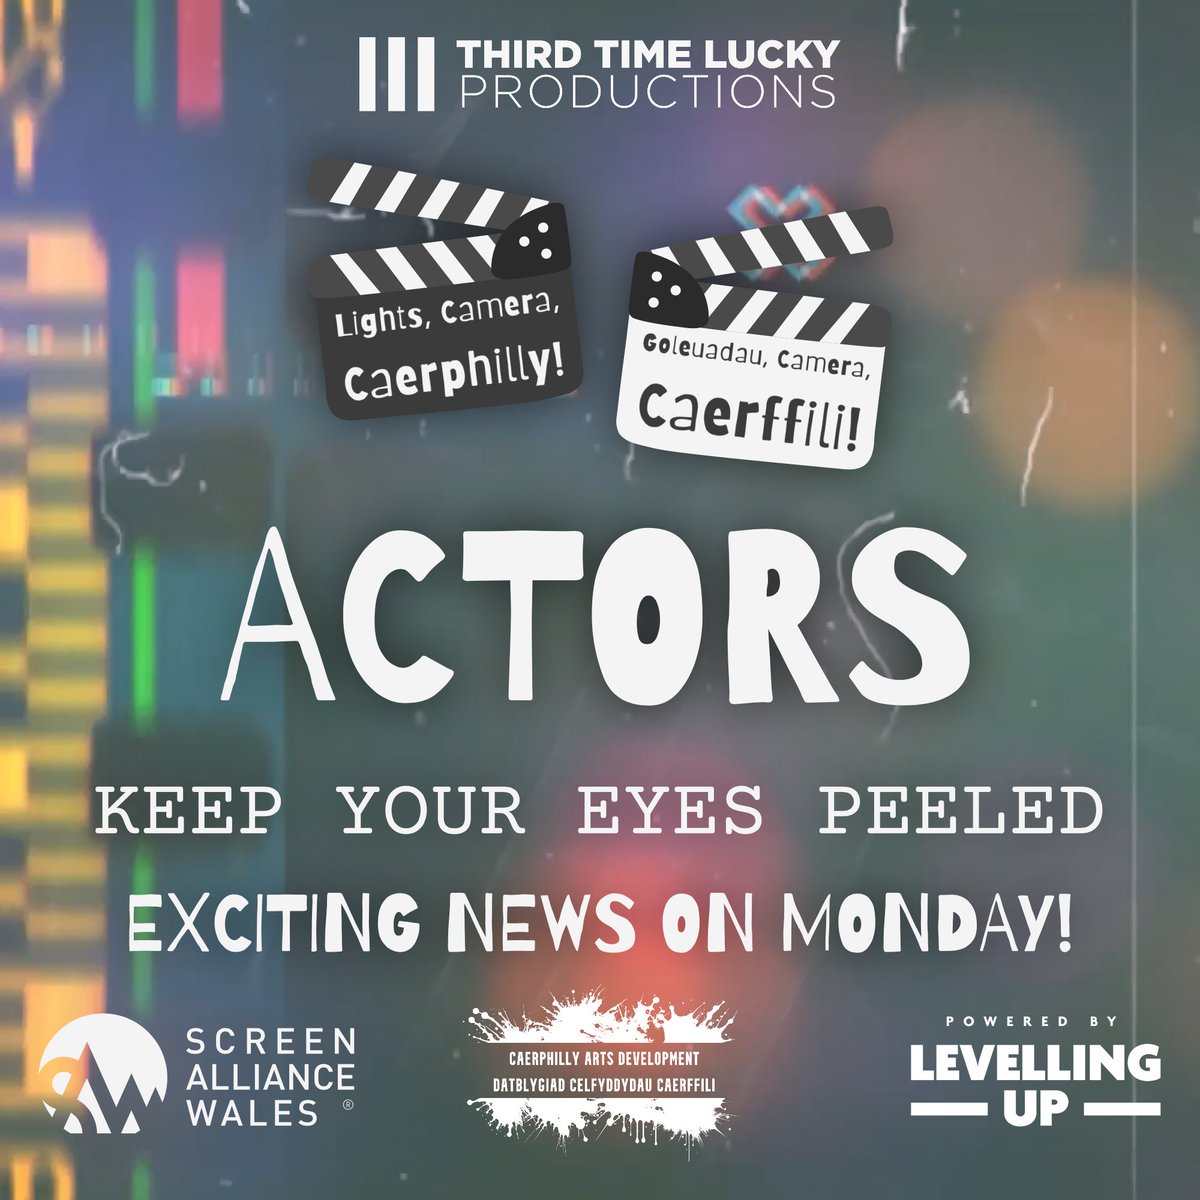 Are you a young aspiring actor in the Caerphilly County? You’ll want to follow our social pages and keep your eyes peeled on Monday!